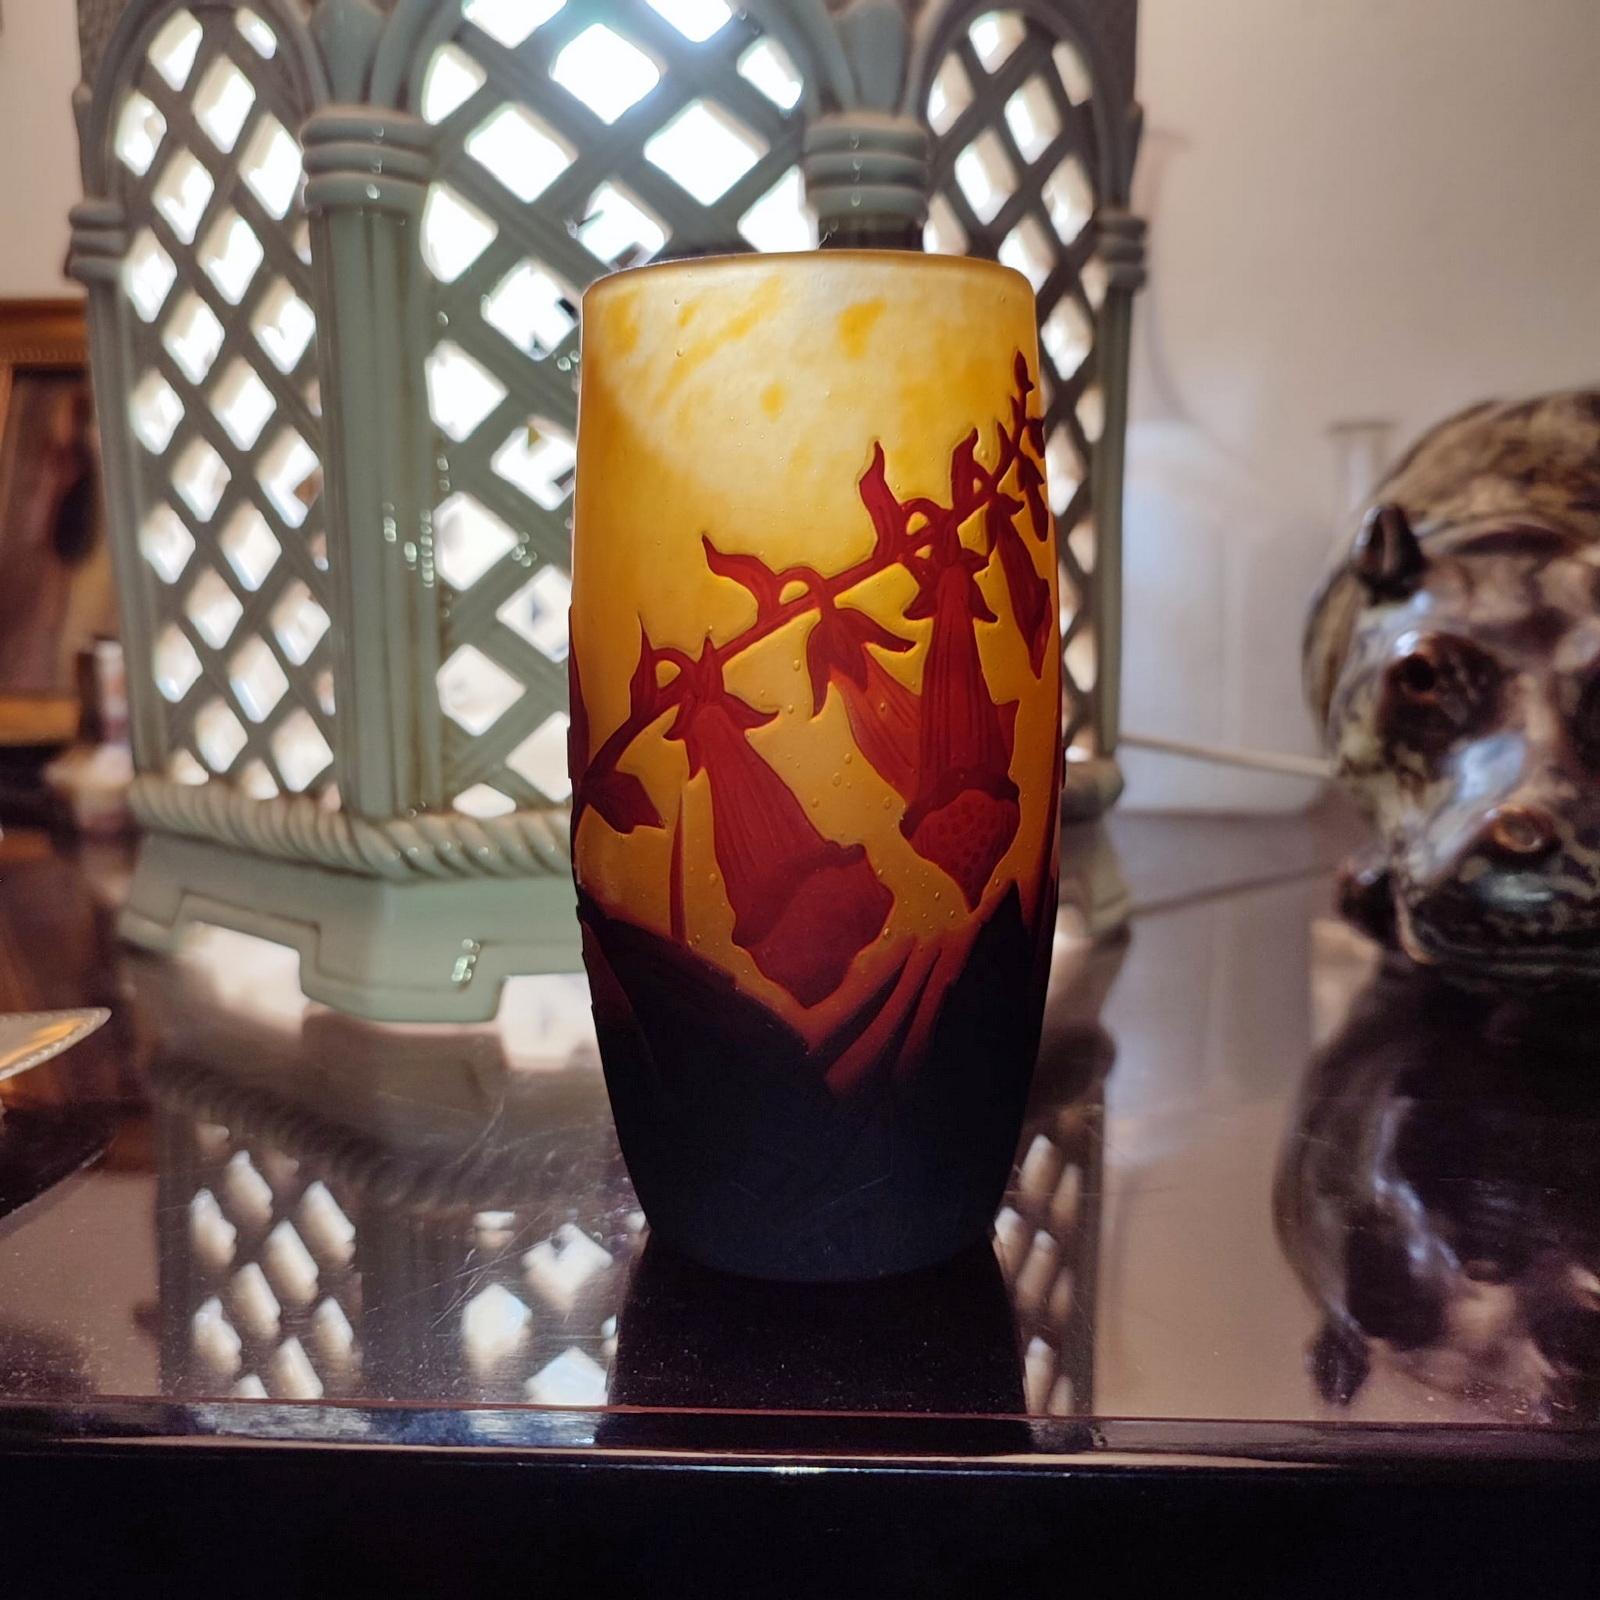 Multilayered glass vase, in cameo technique. Cylindrical form in mottled orange, red, and brown, circa 1910.
The decor of flowers and leaves is engraved in reserve and taken up on the wheel, Crimson red color on an orange-yellow background speckled